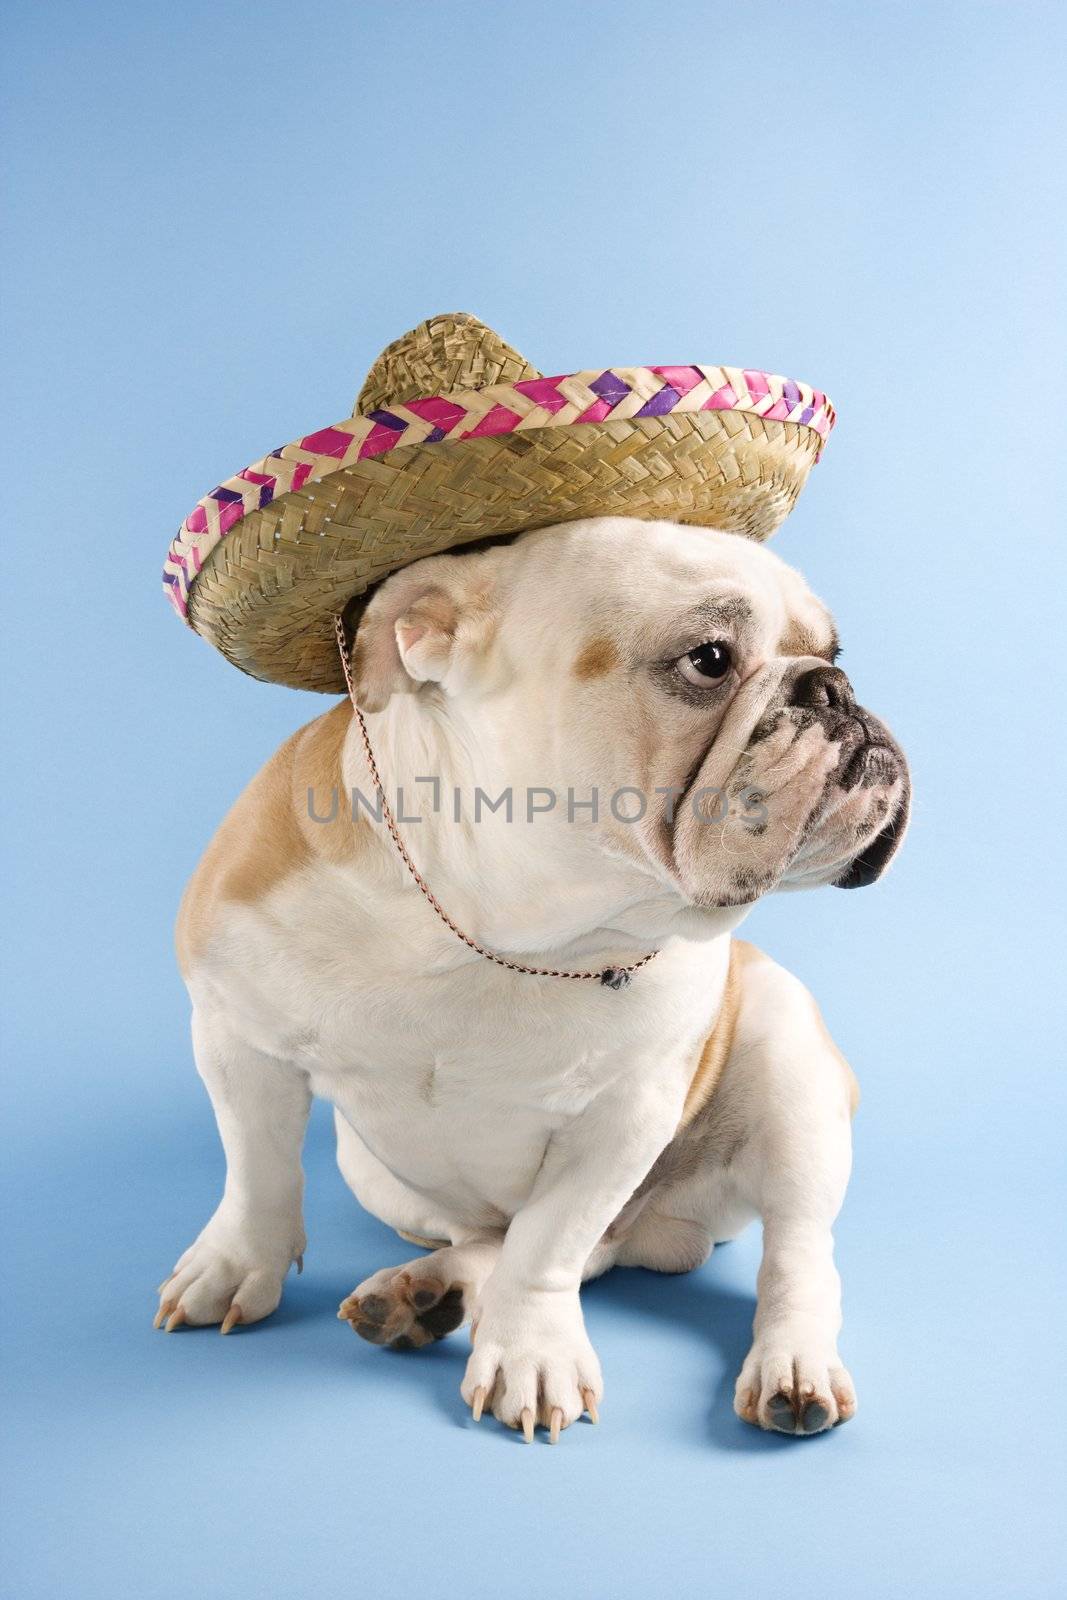 English Bulldog wearing sombrero on blue background looking off to the side.